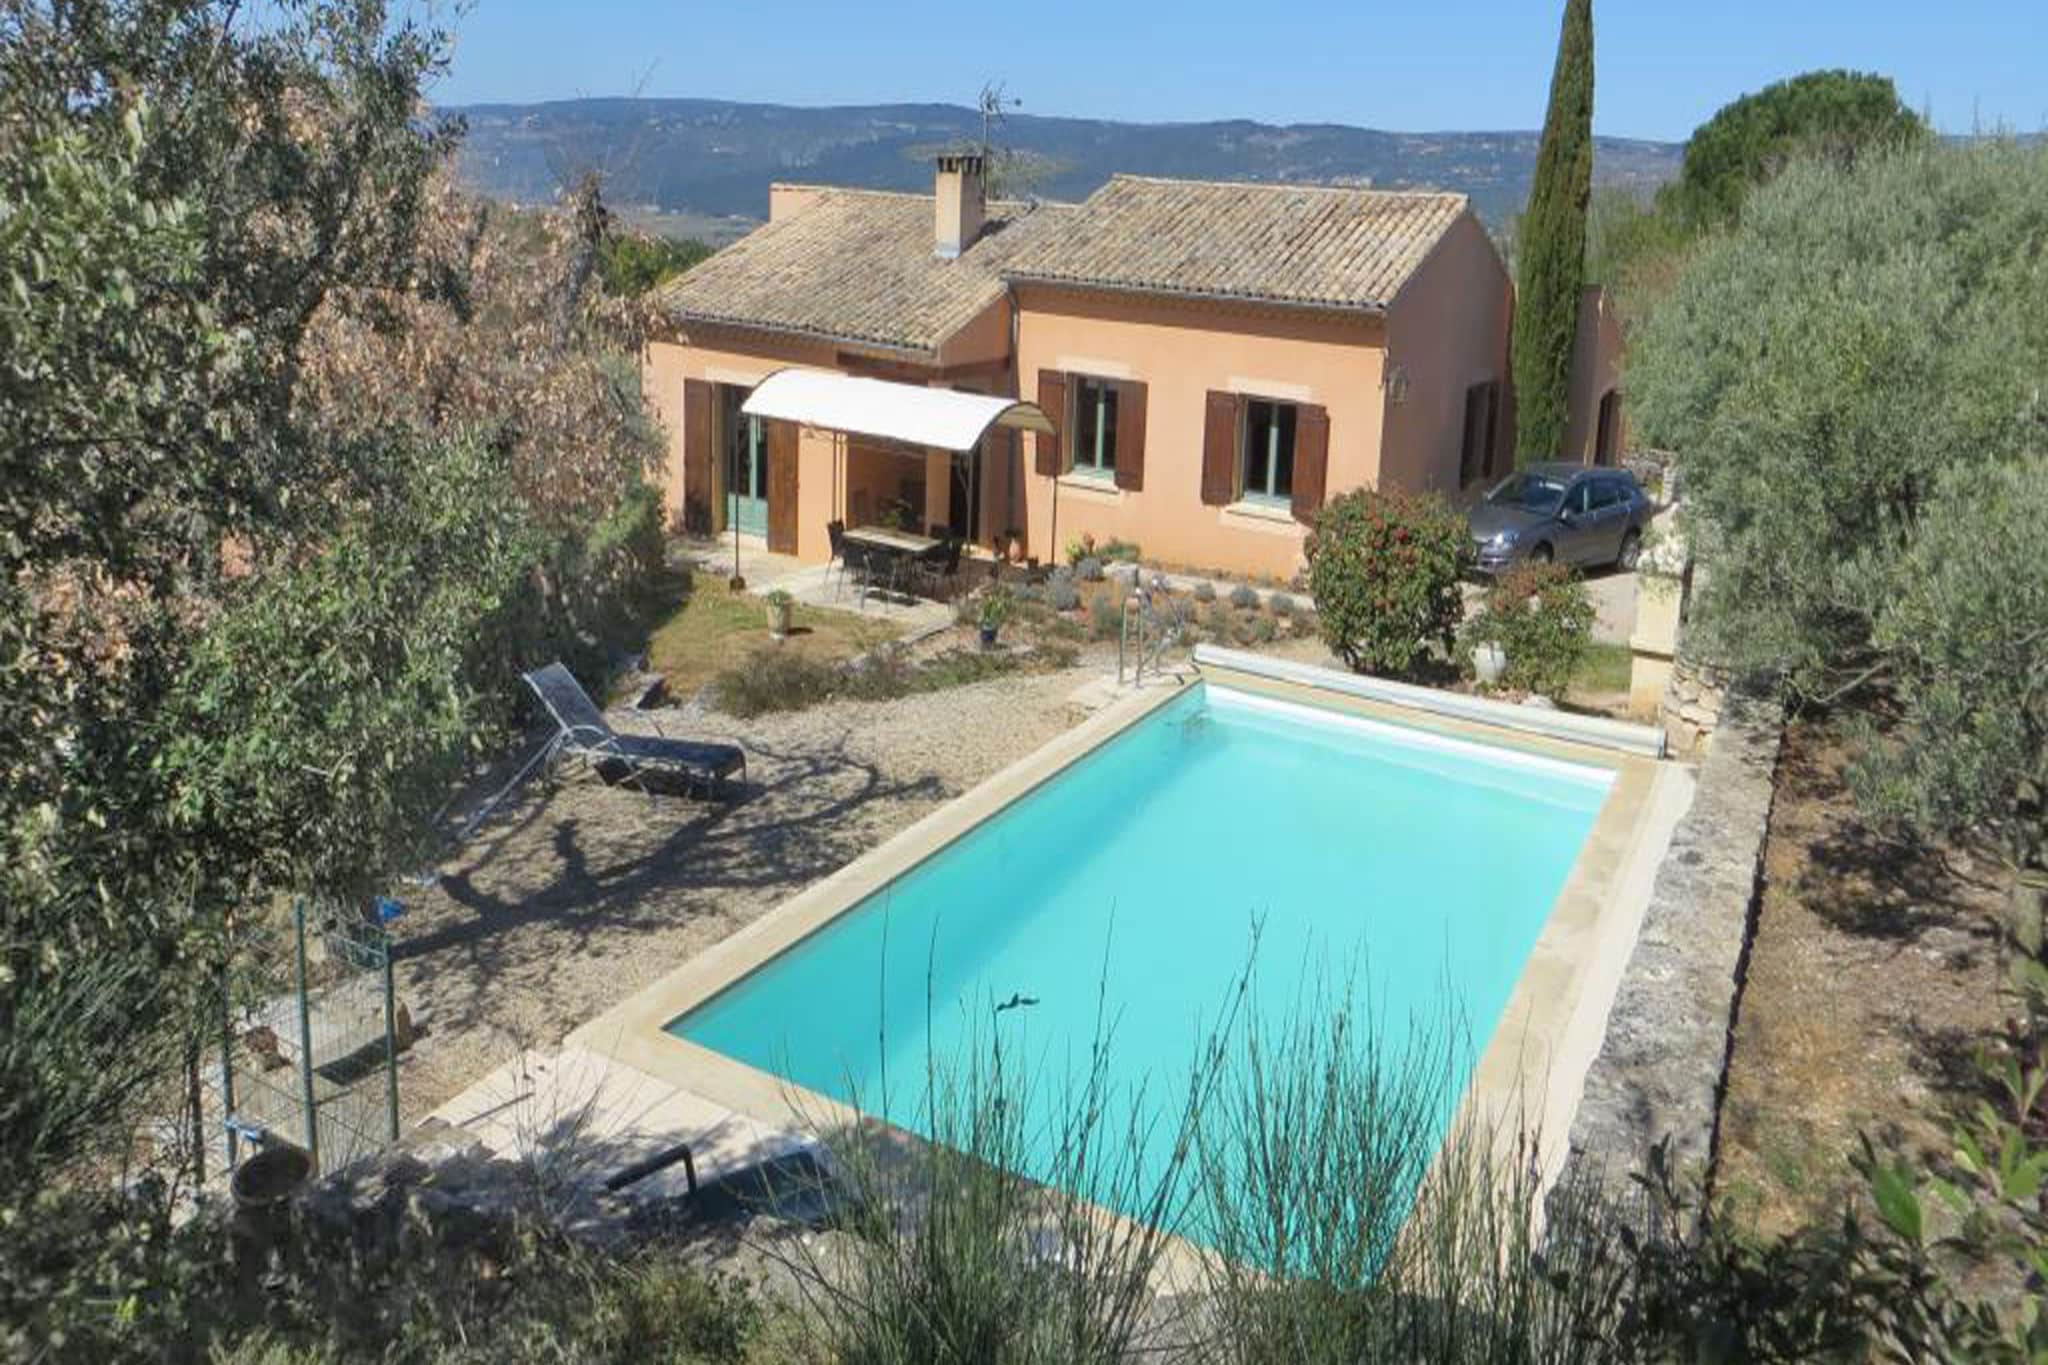 Detached holiday home with private pool in the village of Roussillon